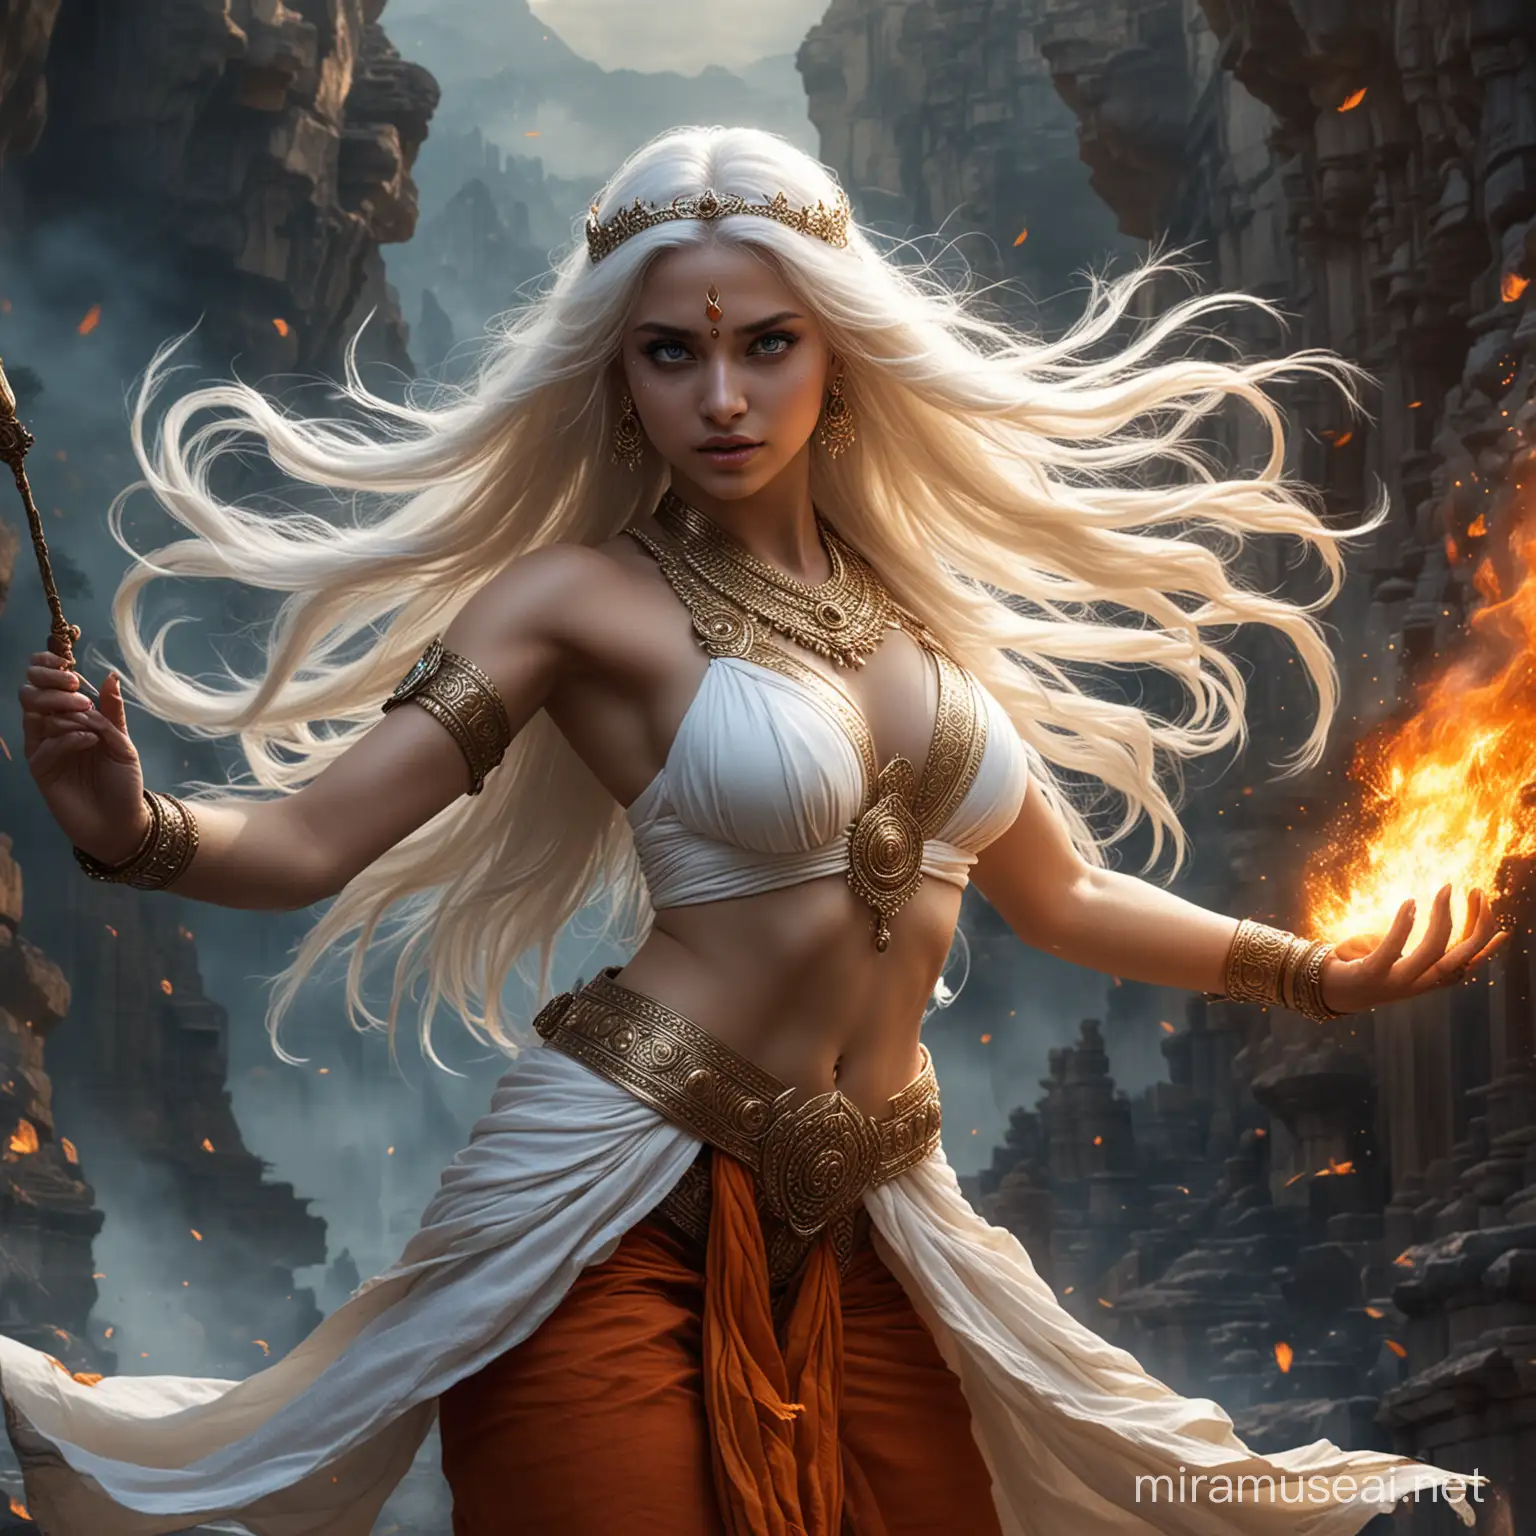 Majestic Hindu Empress Goddess in Fiery Combat Amidst Dark Valley and Palace